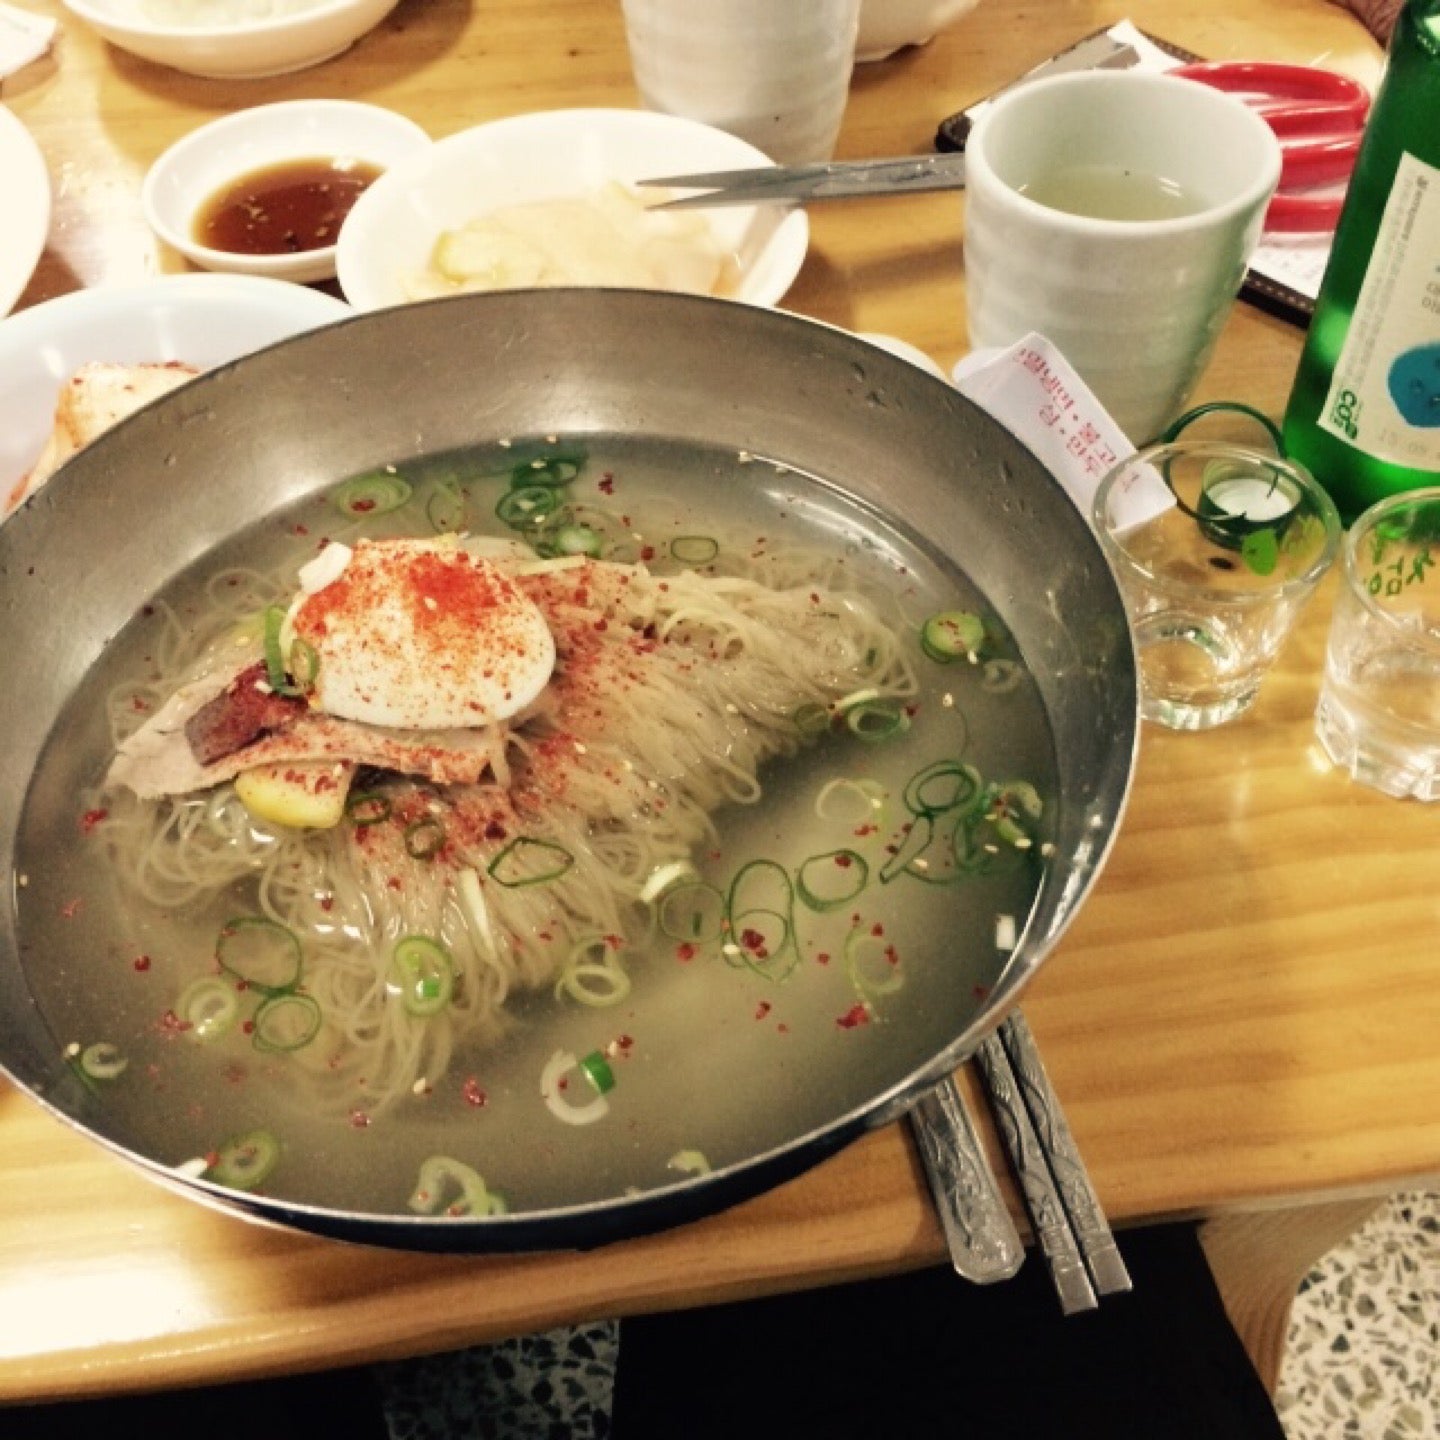 PyoungYang Noodle House (평양면옥)